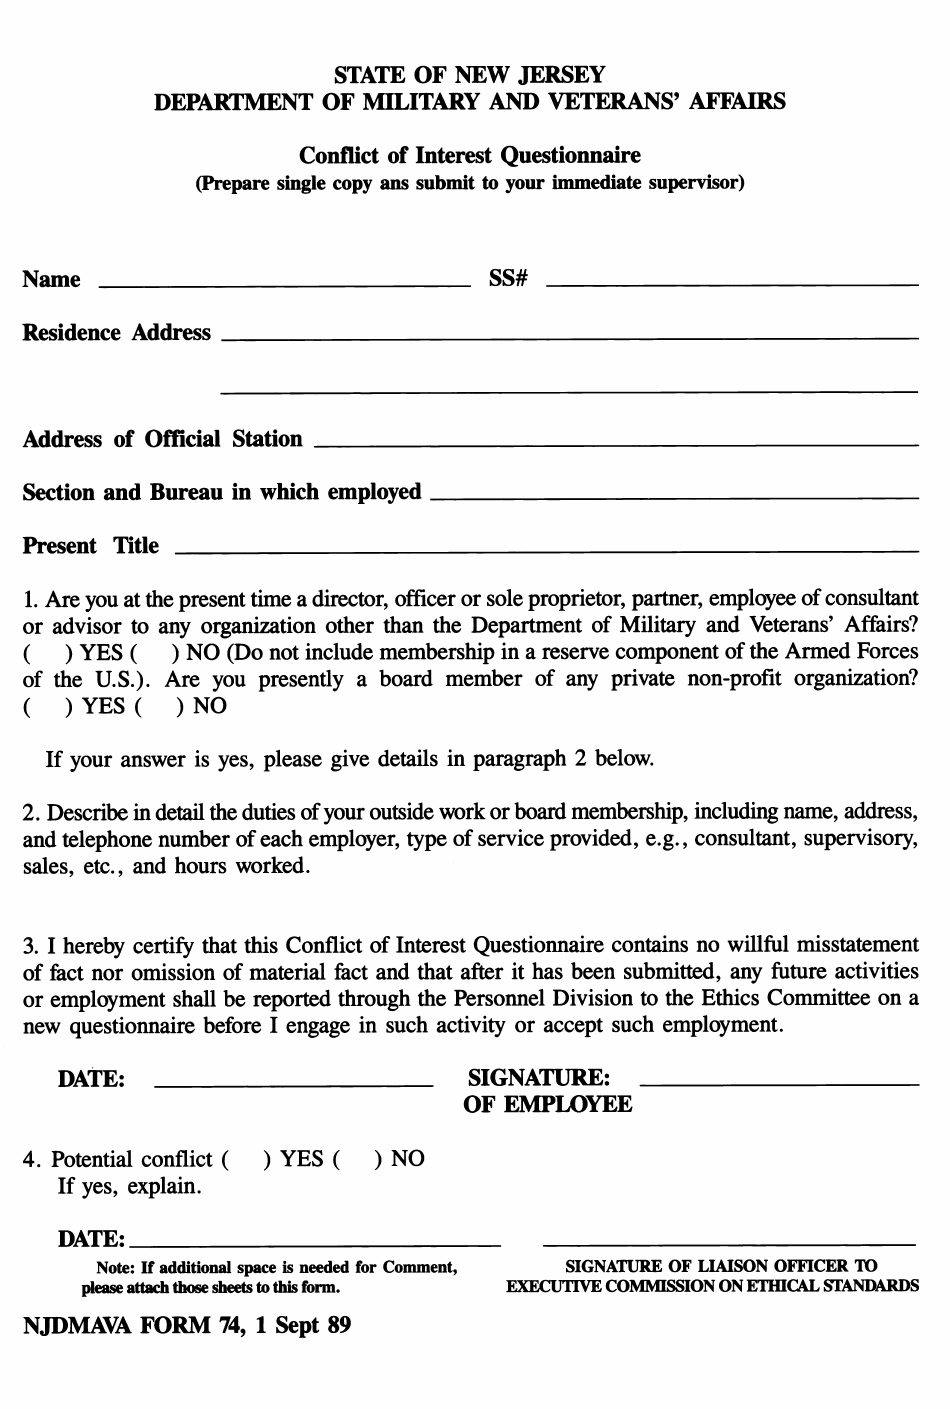 NJDMAVA Form 74 Download Fillable PDF or Fill Online Conflict of